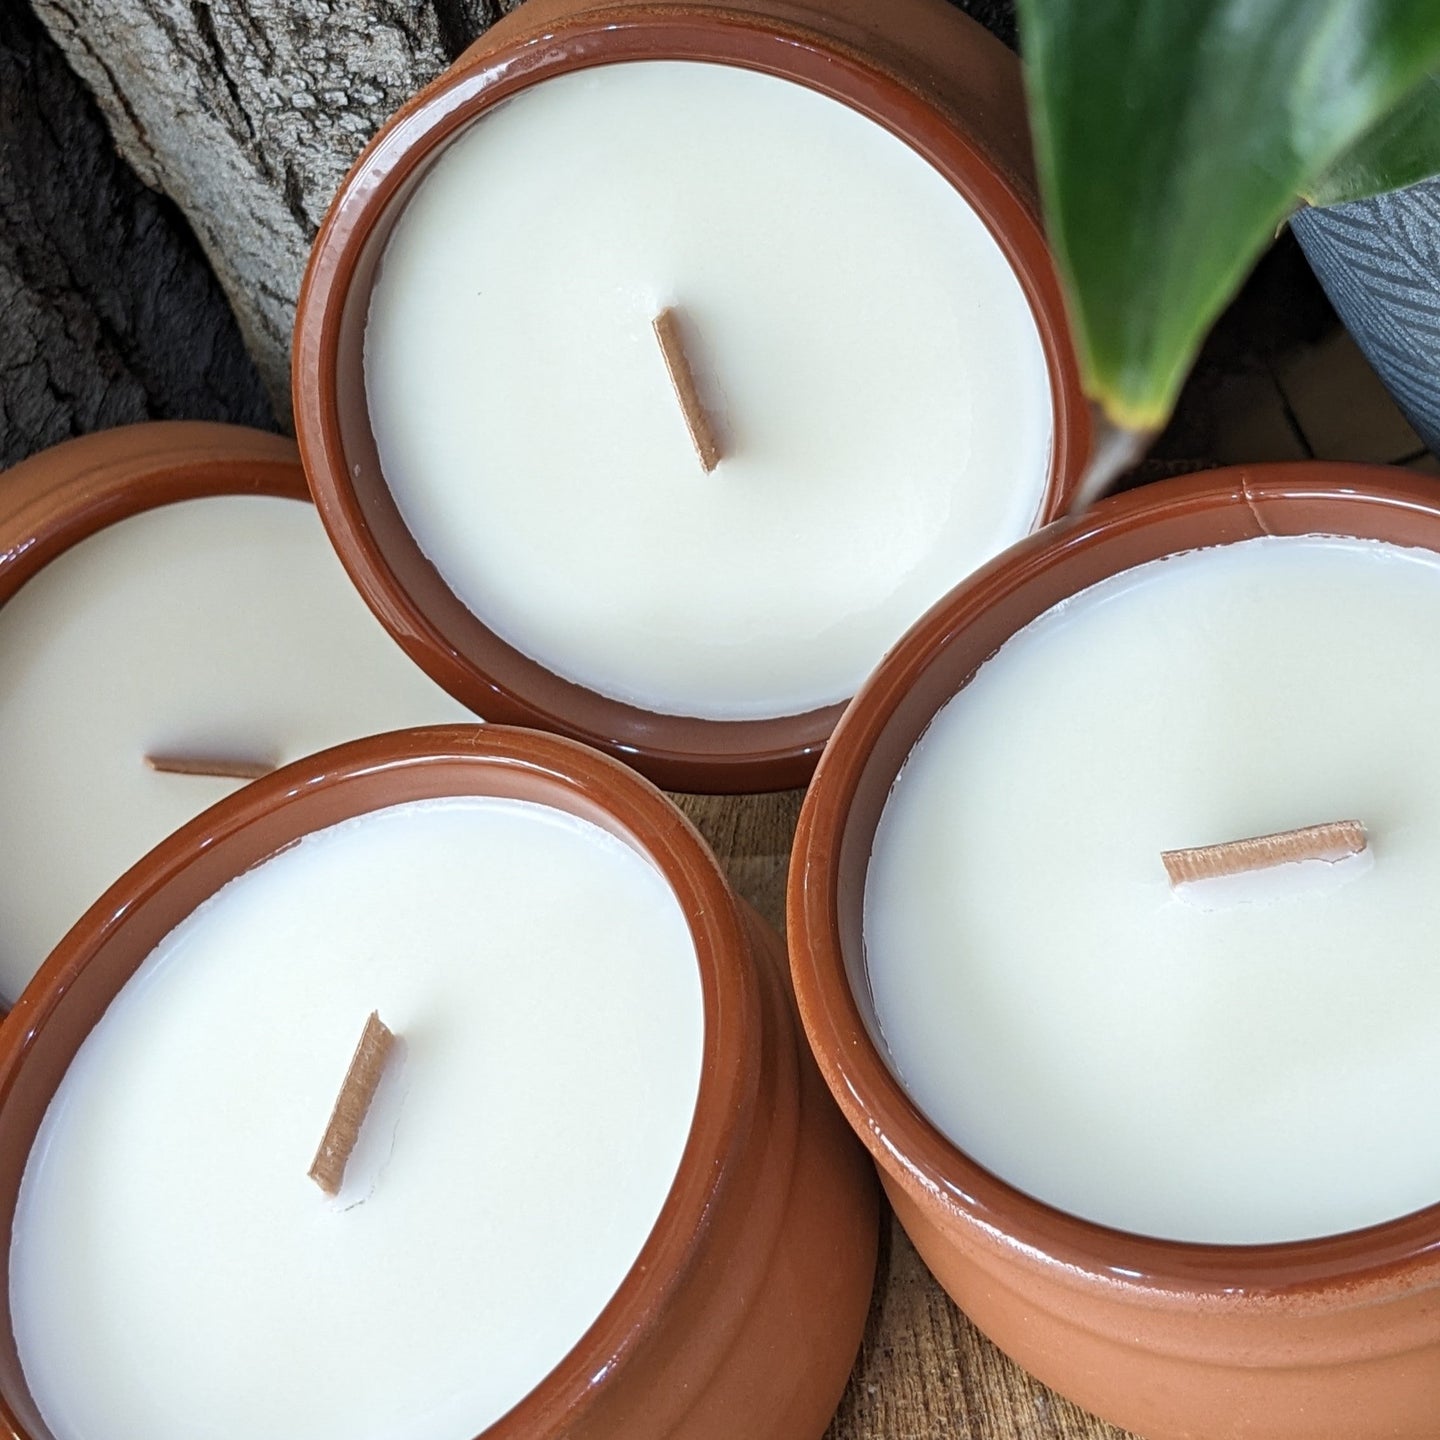 SOY CITRONELA CANDLE WOOD WICK REPELLENT